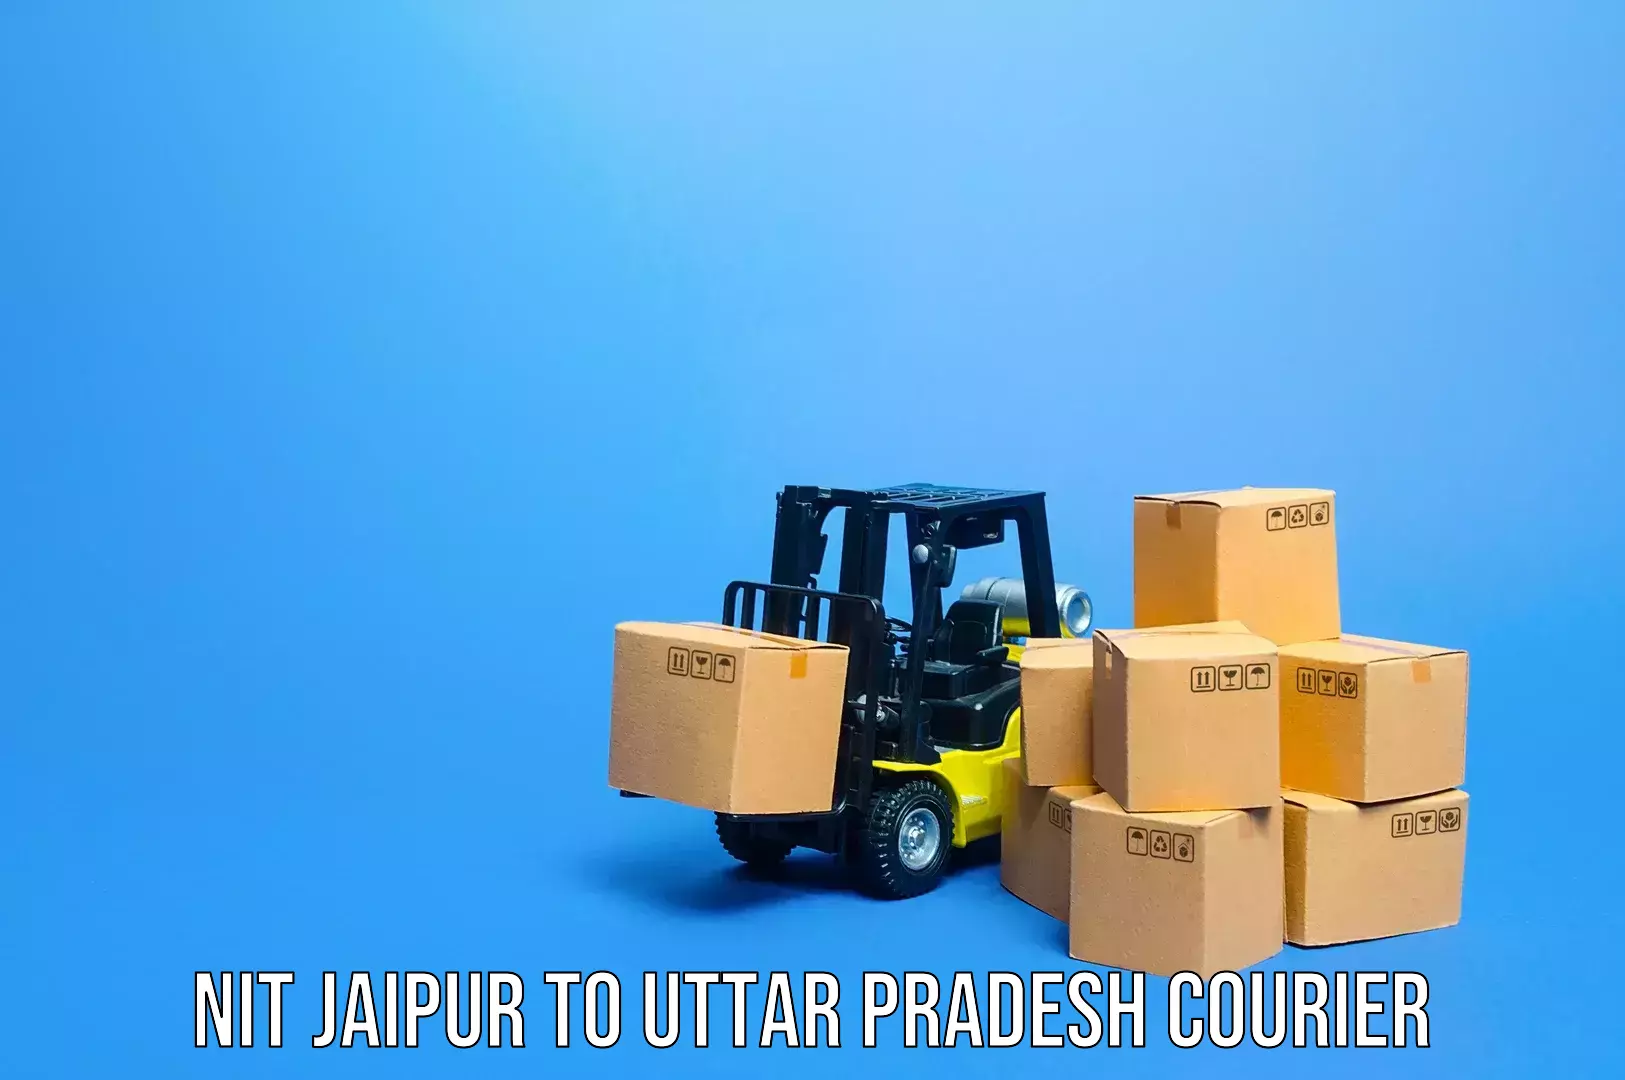 Luggage transport consulting in NIT Jaipur to Akbarpur